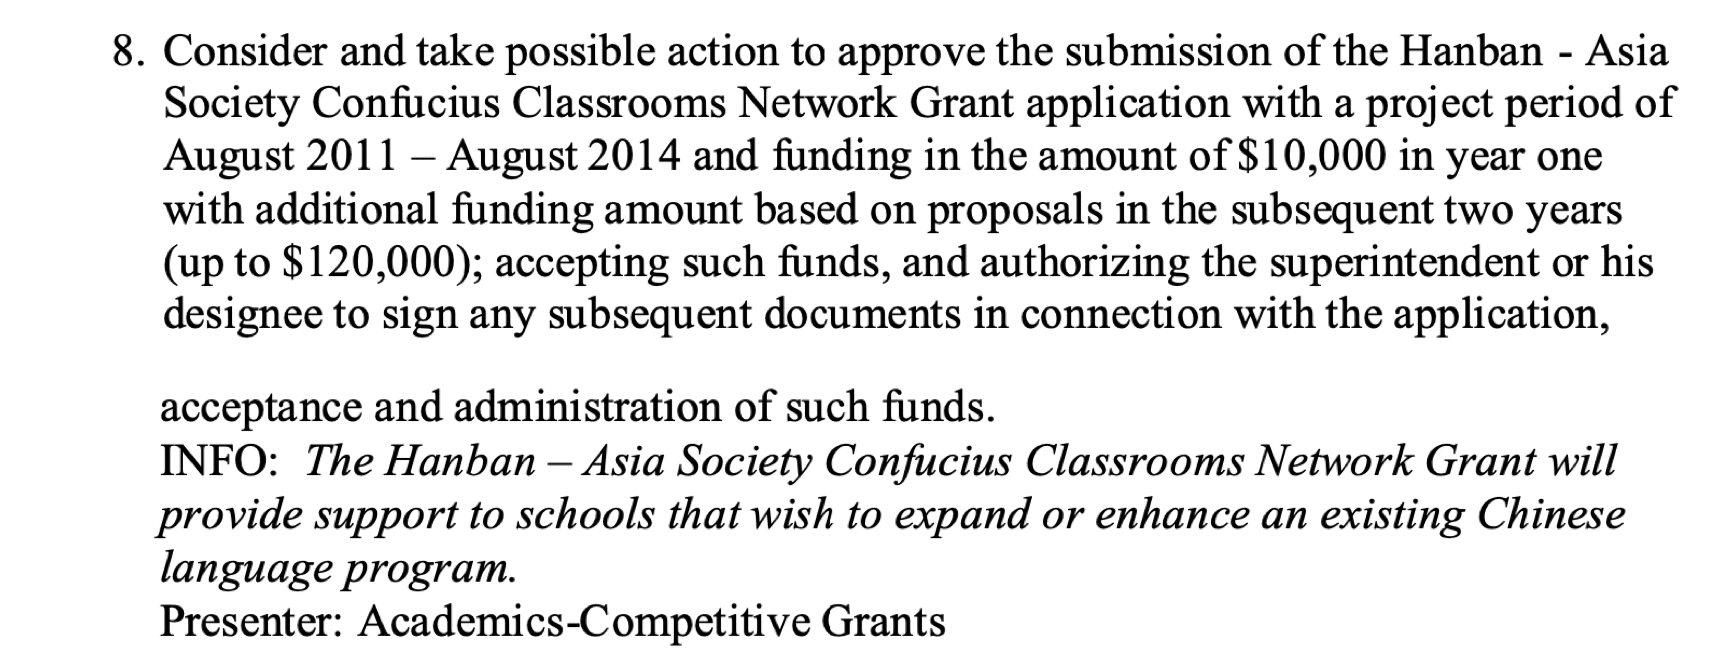 8. Consider and take possible action to approve the submission of the Hanban - Asia Society Confucius Classrooms Network Grant application with a project period of August 2011 - August 2014 and funding in the amount of $10,000 in year one with additional funding amount based on proposals in the subsequent two years (up to $120,000); accepting such funds, and authorizing the superintendent or his designee to sign any subsequent documents in connection with the application, acceptance and administration of such funds. INFO: The Hanban • Asia Society Confucius Classrooms Network Grant will provide support to schools that wish to expand or enhance an existing Chinese language program. Presenter: Academics-Competitive Grants